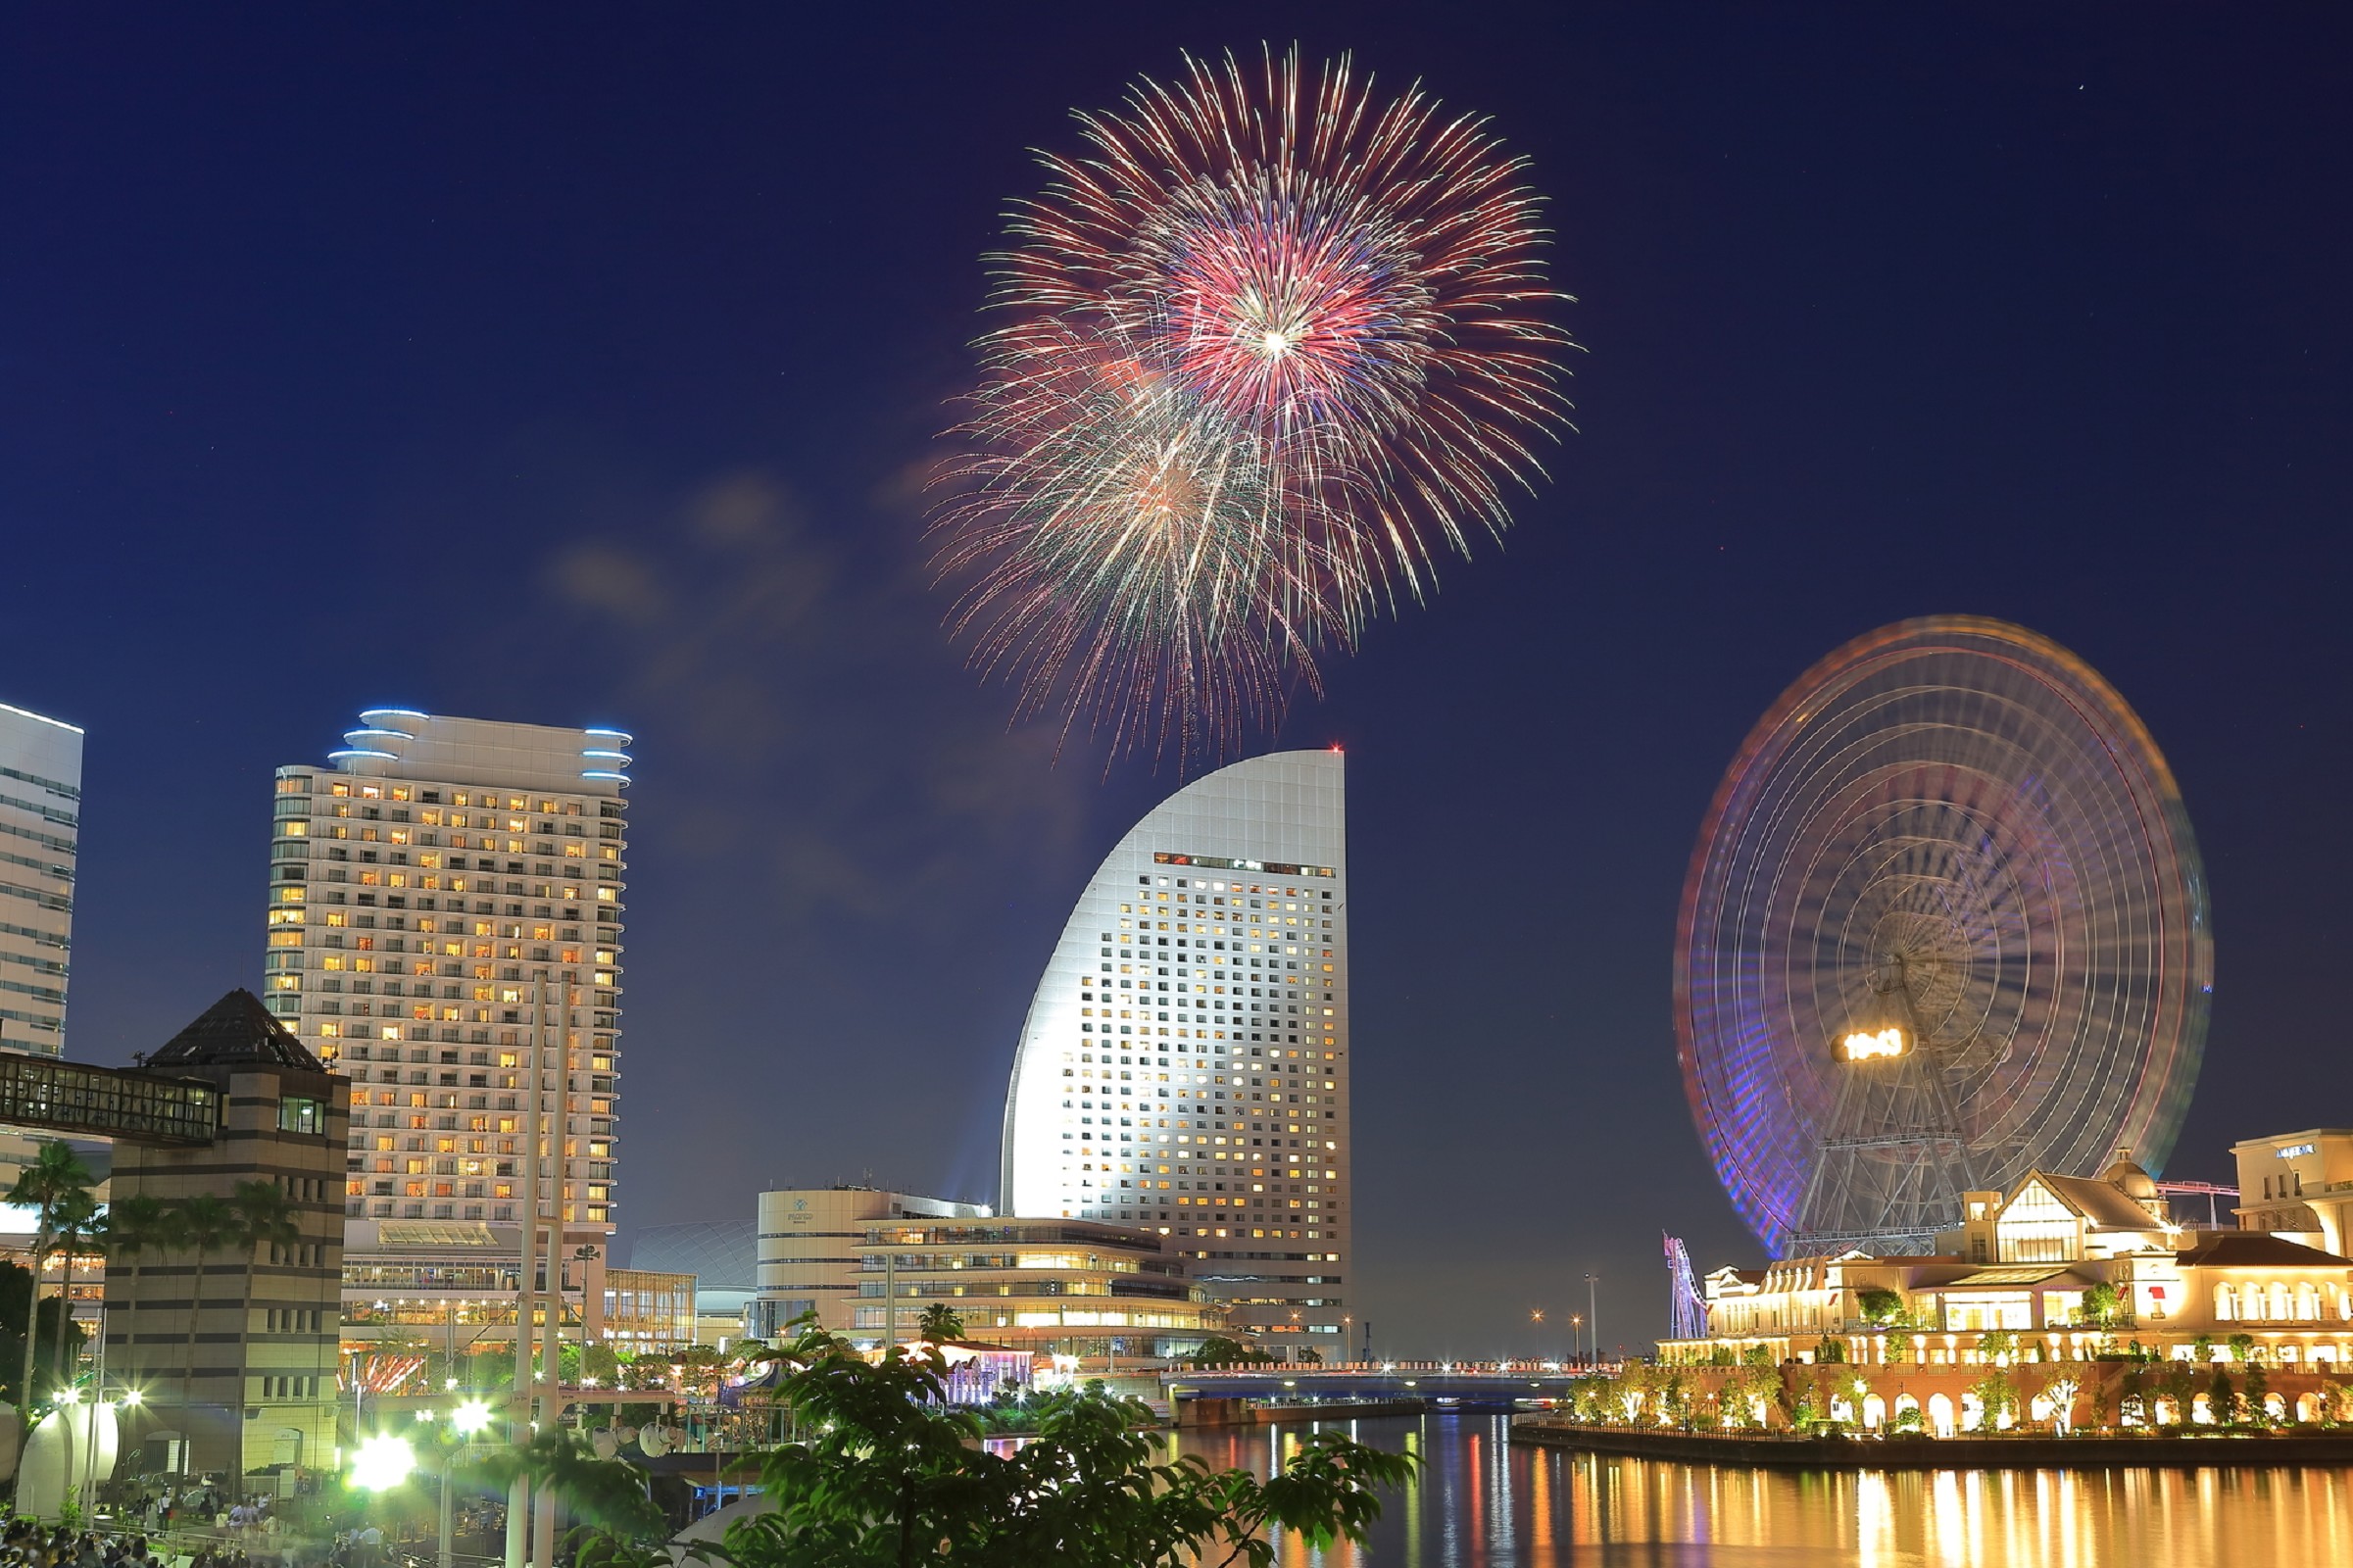 Yokohama is throwing a festival this weekend with Bon-odori parties and fireworks